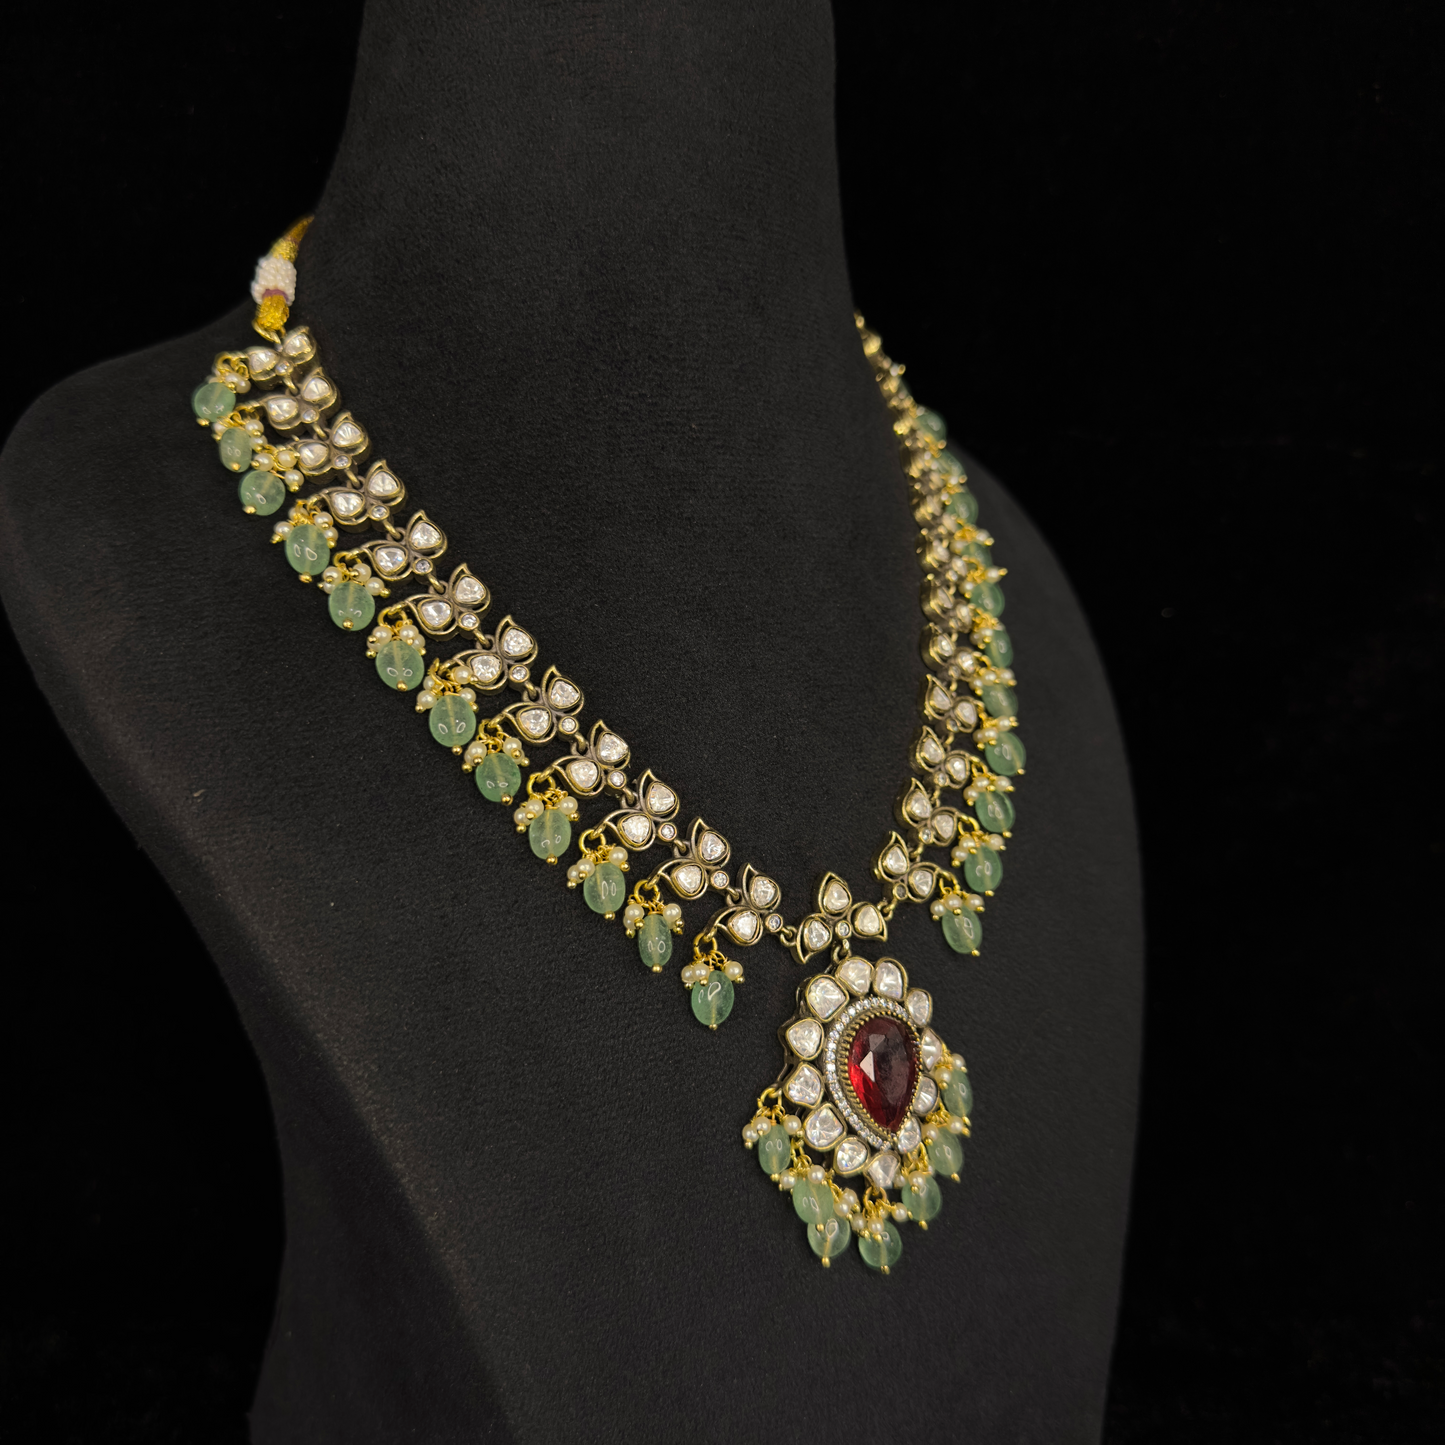 Beauteous Victorian polki Necklace with AD stones